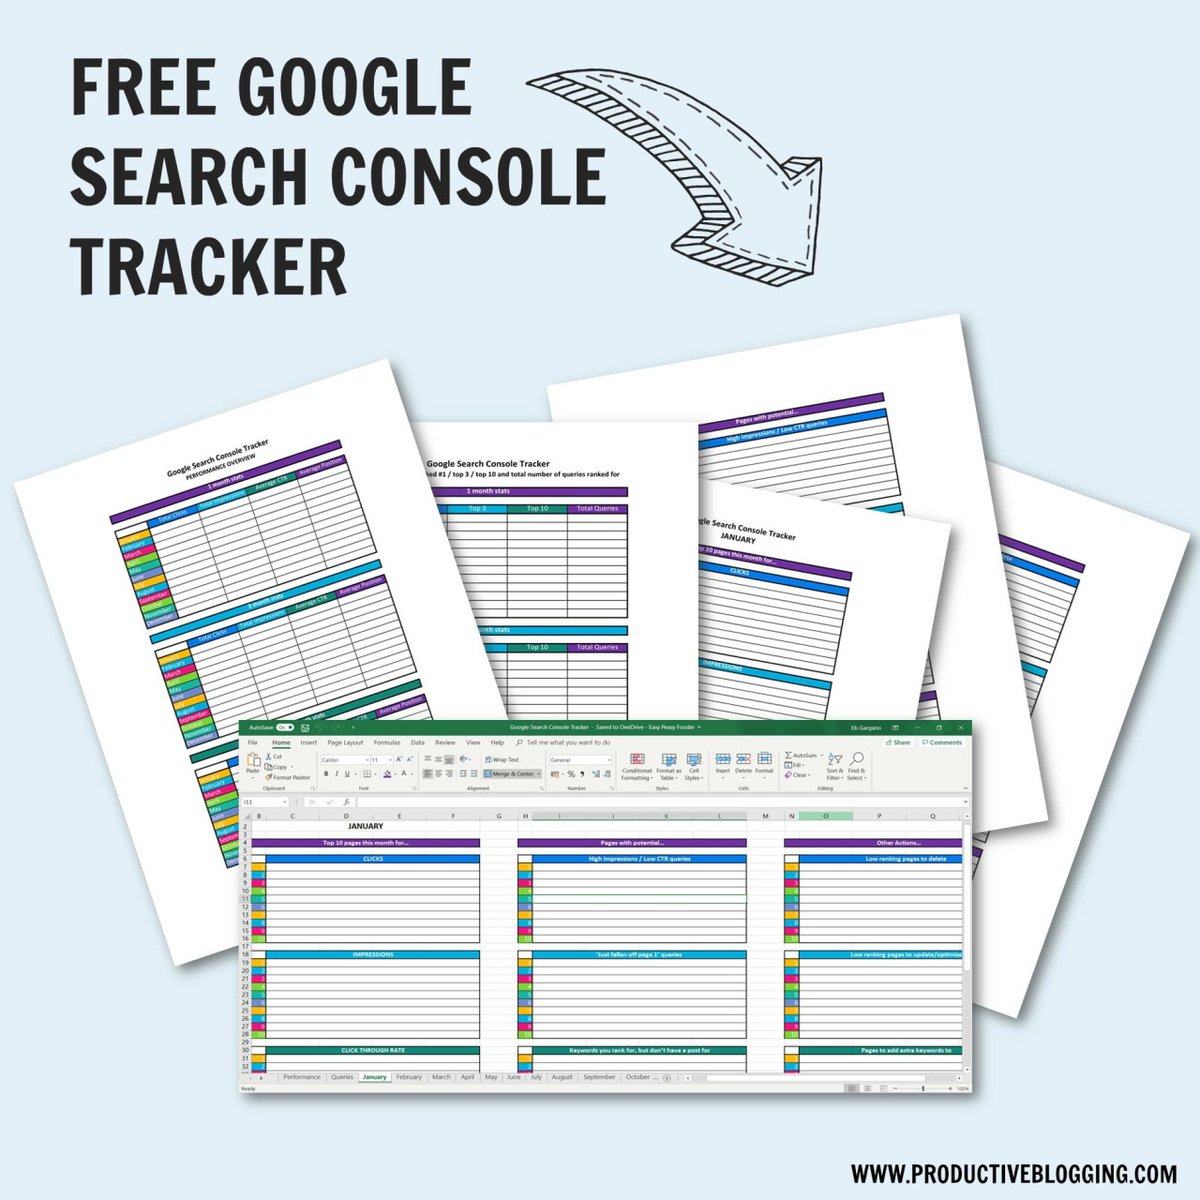 Wish someone would create the perfect spreadsheet for you to track your #SEO progress on #GoogleSearchConsole? 

Your wish is my command! Head over to #ProductiveBlogging to get your hands on my Google Search Console Tracker Spreadsheet => bit.ly/2TY3Udf?utm_ca…